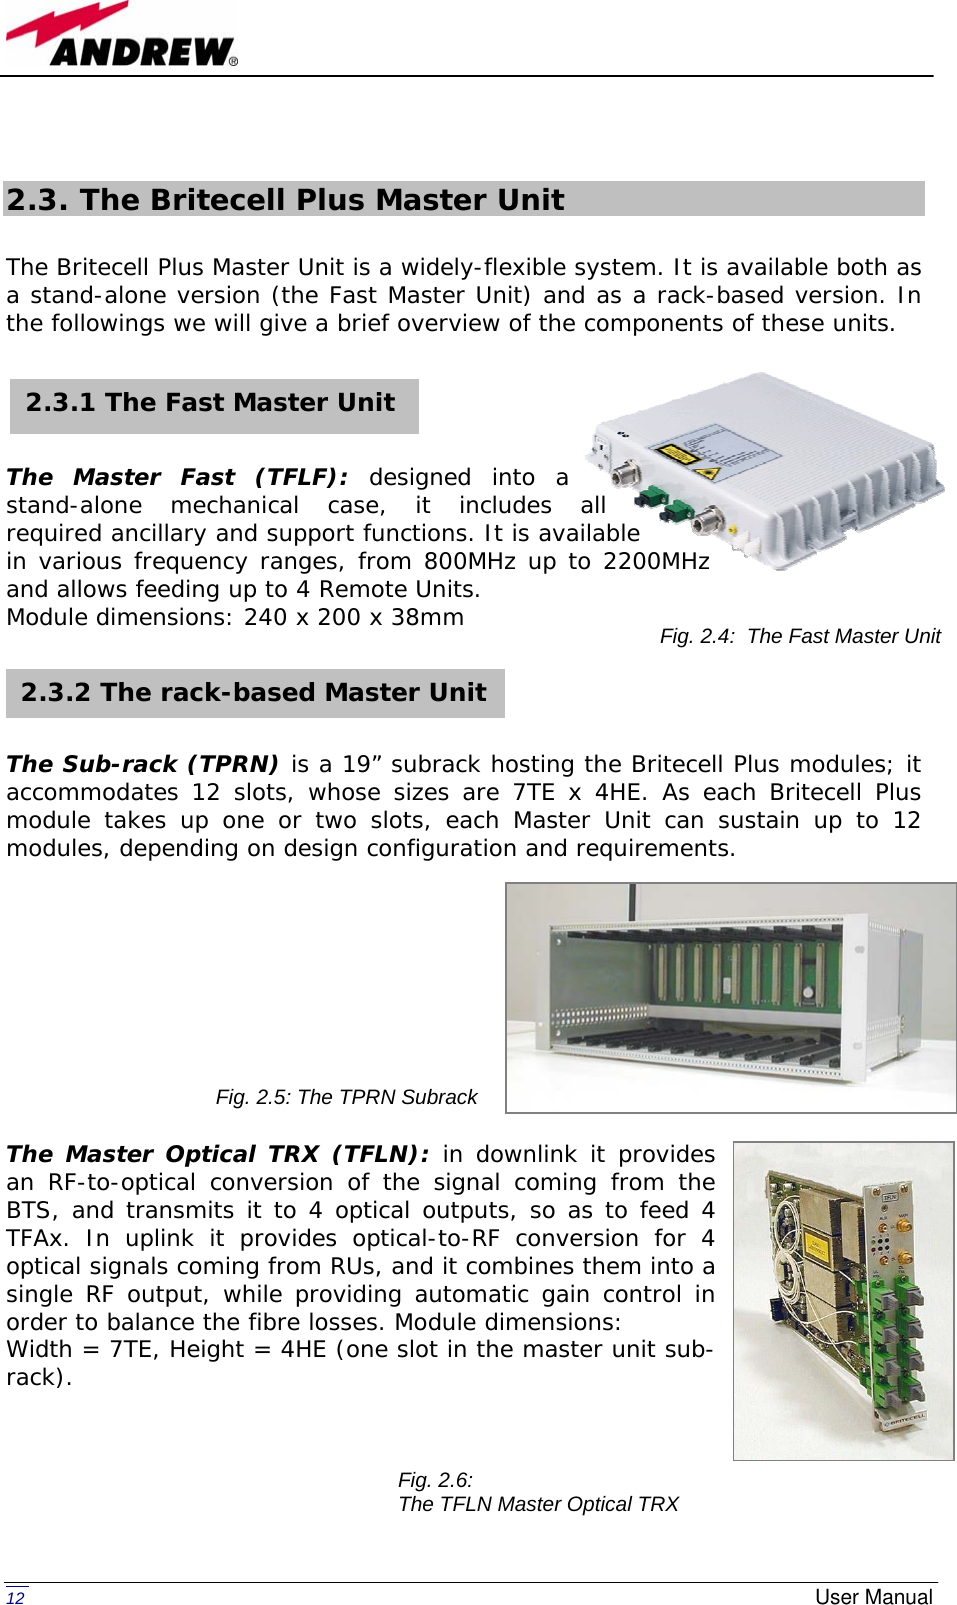   12  User Manual 2.3. The Britecell Plus Master Unit  The Britecell Plus Master Unit is a widely-flexible system. It is available both as a stand-alone version (the Fast Master Unit) and as a rack-based version. In the followings we will give a brief overview of the components of these units.      The Master Fast (TFLF): designed into a stand-alone mechanical case, it includes all required ancillary and support functions. It is available in various frequency ranges, from 800MHz up to 2200MHz and allows feeding up to 4 Remote Units. Module dimensions: 240 x 200 x 38mm      The Sub-rack (TPRN) is a 19” subrack hosting the Britecell Plus modules; it accommodates 12 slots, whose sizes are 7TE x 4HE. As each Britecell Plus module takes up one or two slots, each Master Unit can sustain up to 12 modules, depending on design configuration and requirements.           The Master Optical TRX (TFLN): in downlink it provides an RF-to-optical conversion of the signal coming from the BTS, and transmits it to 4 optical outputs, so as to feed 4 TFAx. In uplink it provides optical-to-RF conversion for 4 optical signals coming from RUs, and it combines them into a single RF output, while providing automatic gain control in order to balance the fibre losses. Module dimensions:  Width = 7TE, Height = 4HE (one slot in the master unit sub-rack).       2.3.1 The Fast Master Unit 2.3.2 The rack-based Master Unit Fig. 2.4:  The Fast Master Unit Fig. 2.5: The TPRN Subrack Fig. 2.6:  The TFLN Master Optical TRX 